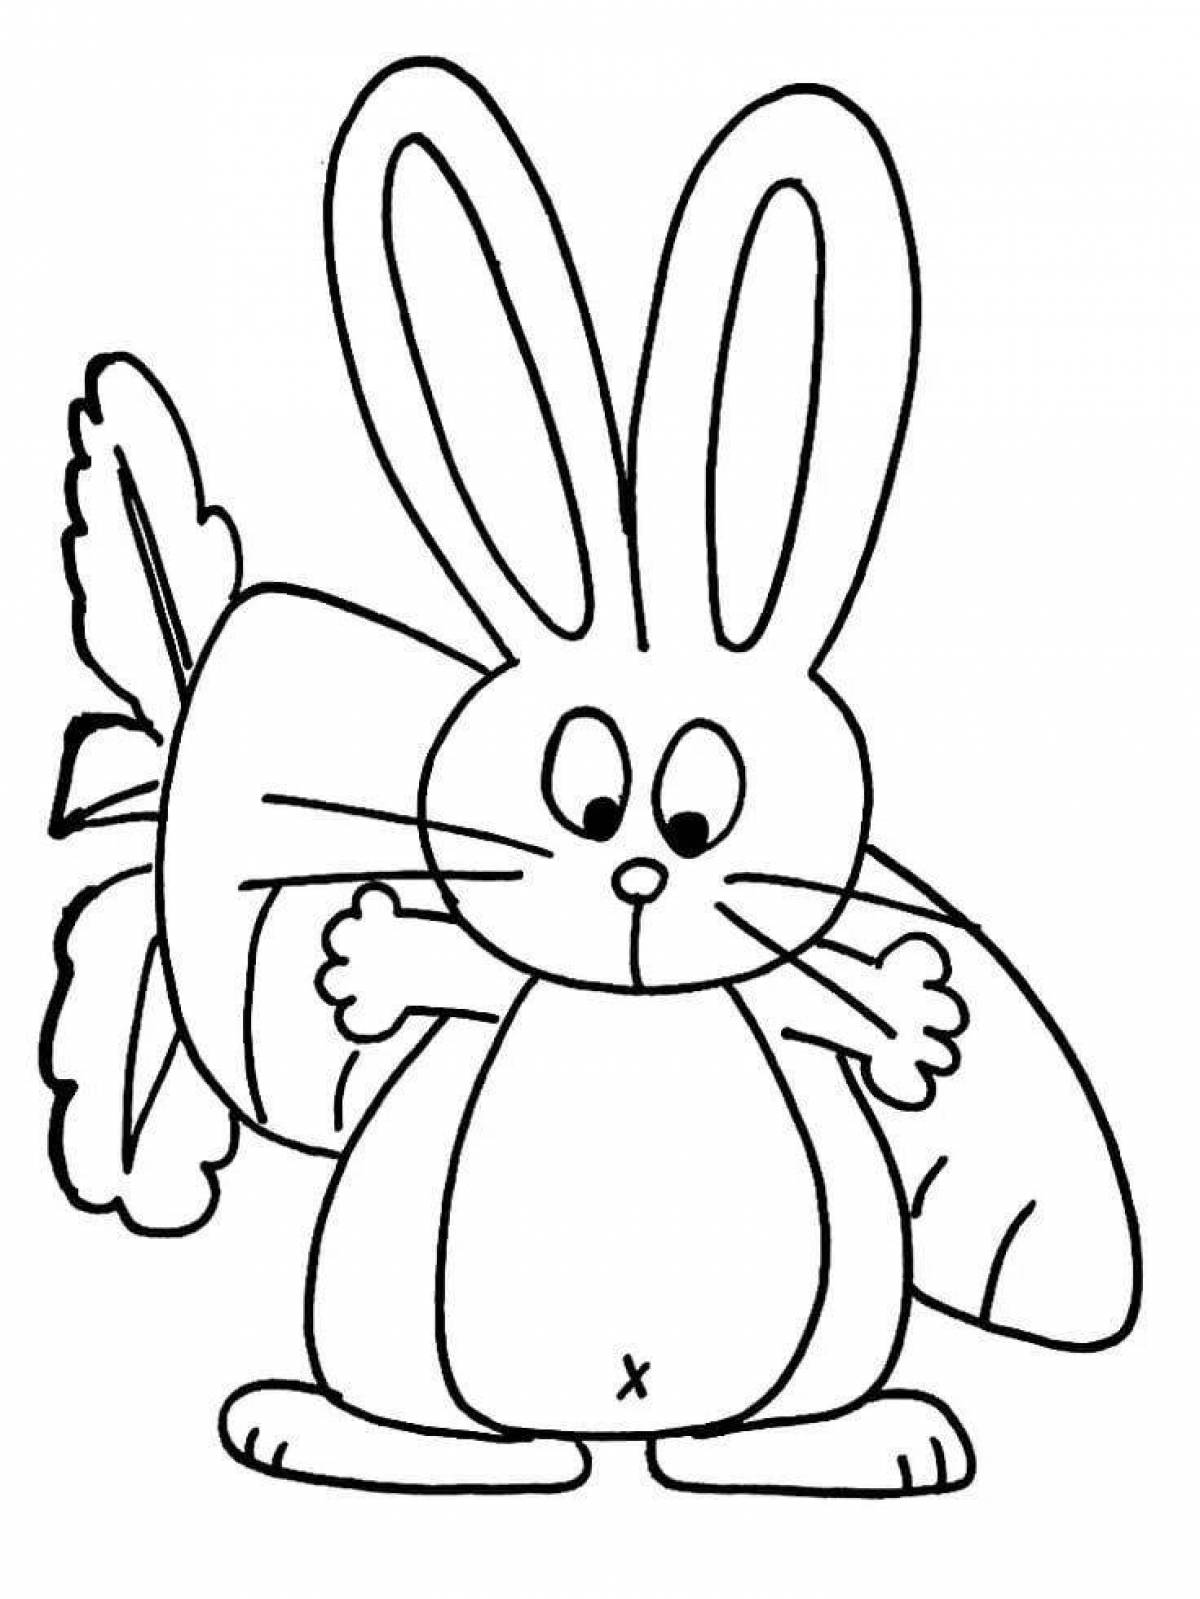 Cute hare coloring for kids